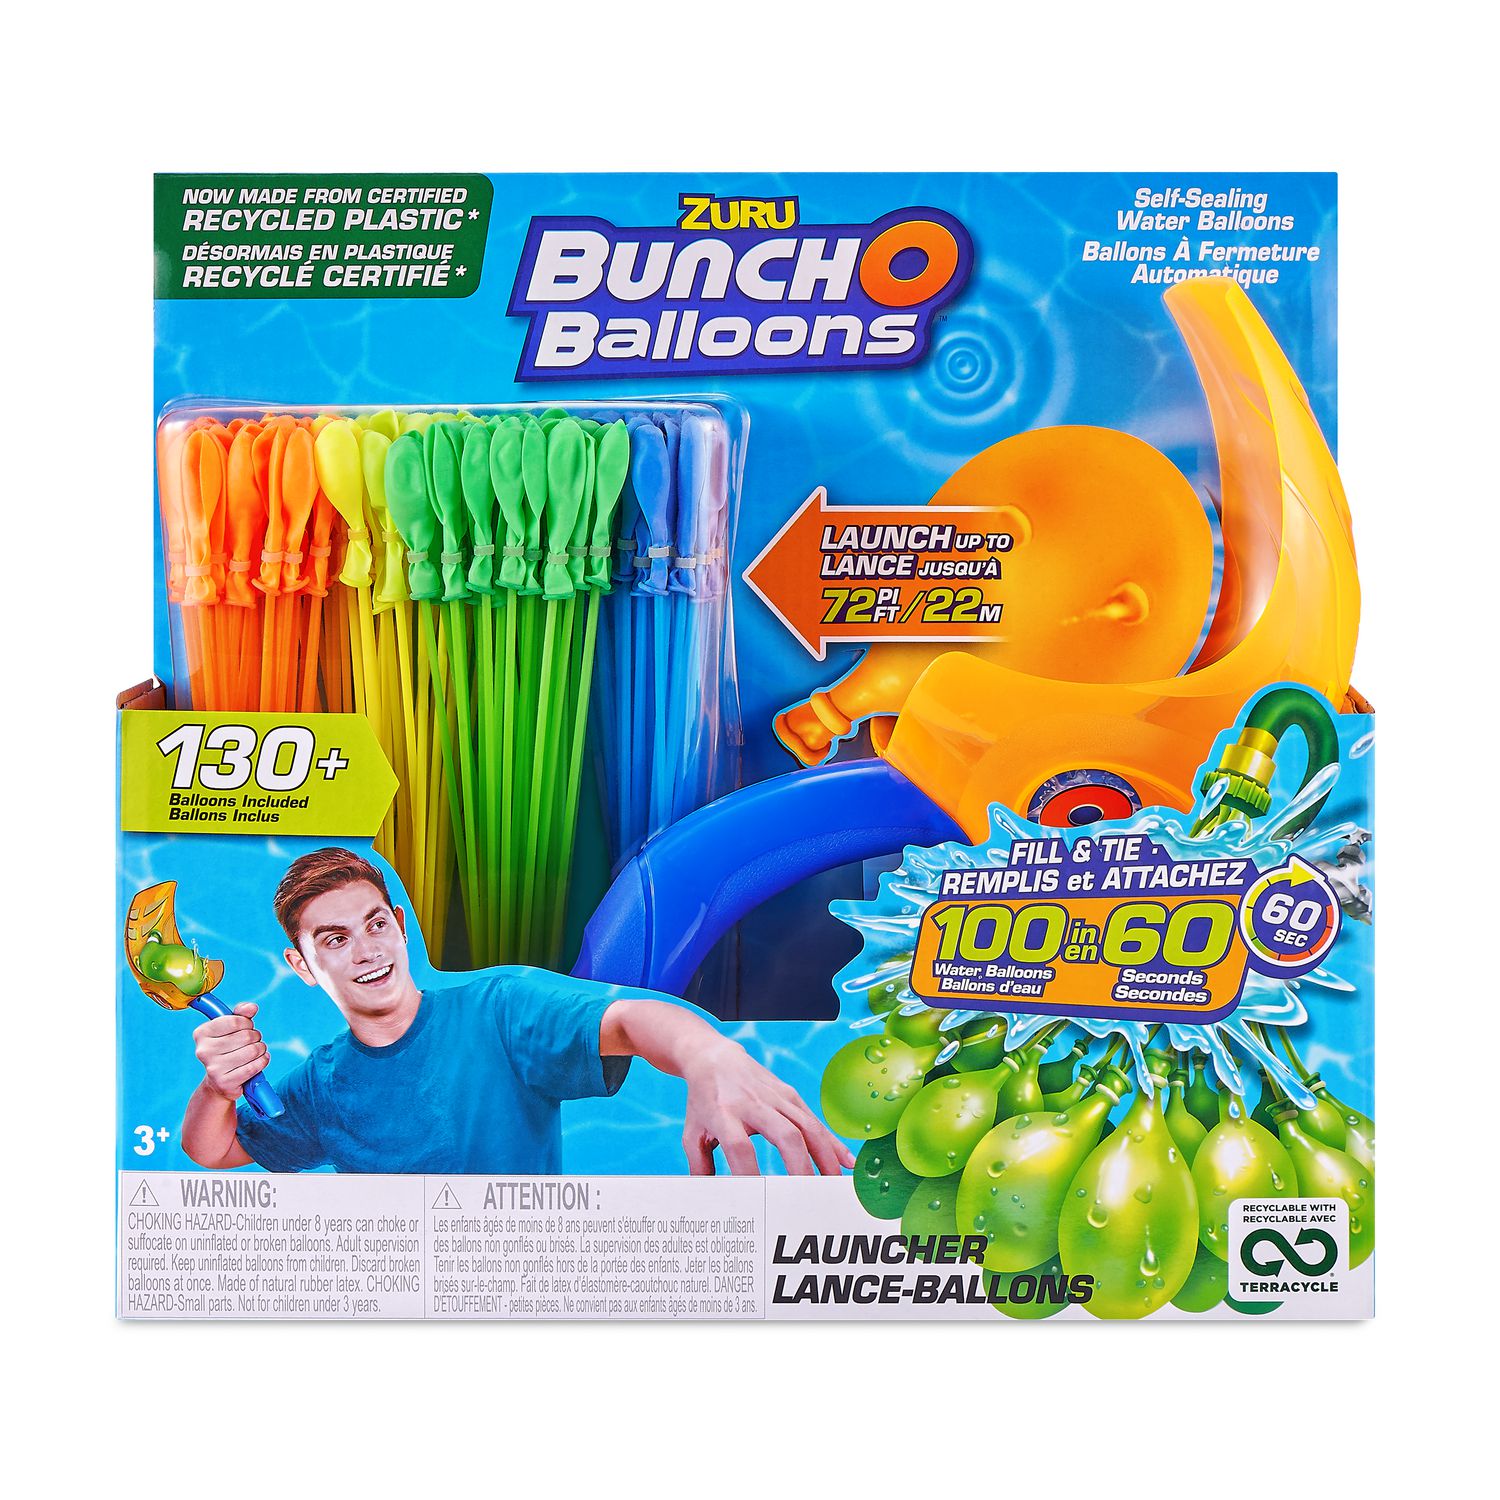 2 Items ZURU Bunch O Balloons Self Sealing Water Balloons Bundled with One Water Balloon Slingshot Launcher Set 105 Total Quick Fill Water Balloons Assorted Colors 